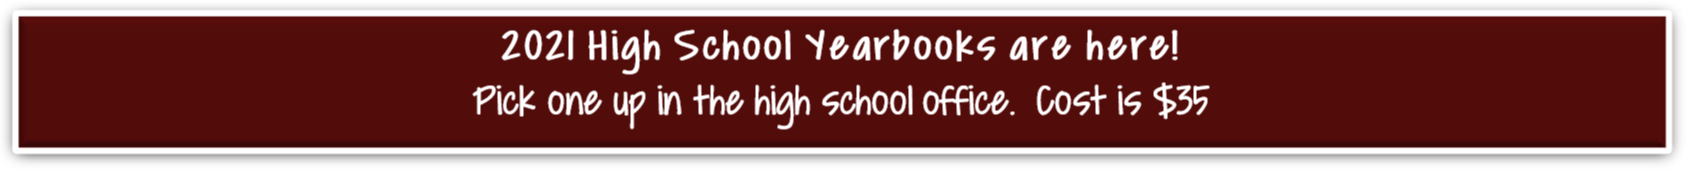 2019 HIGH SCHOOL YEARBOOKS ARE HERE! PICK ONE UP IN THE HIGH SCHOOL OFFICE. COST IS $35